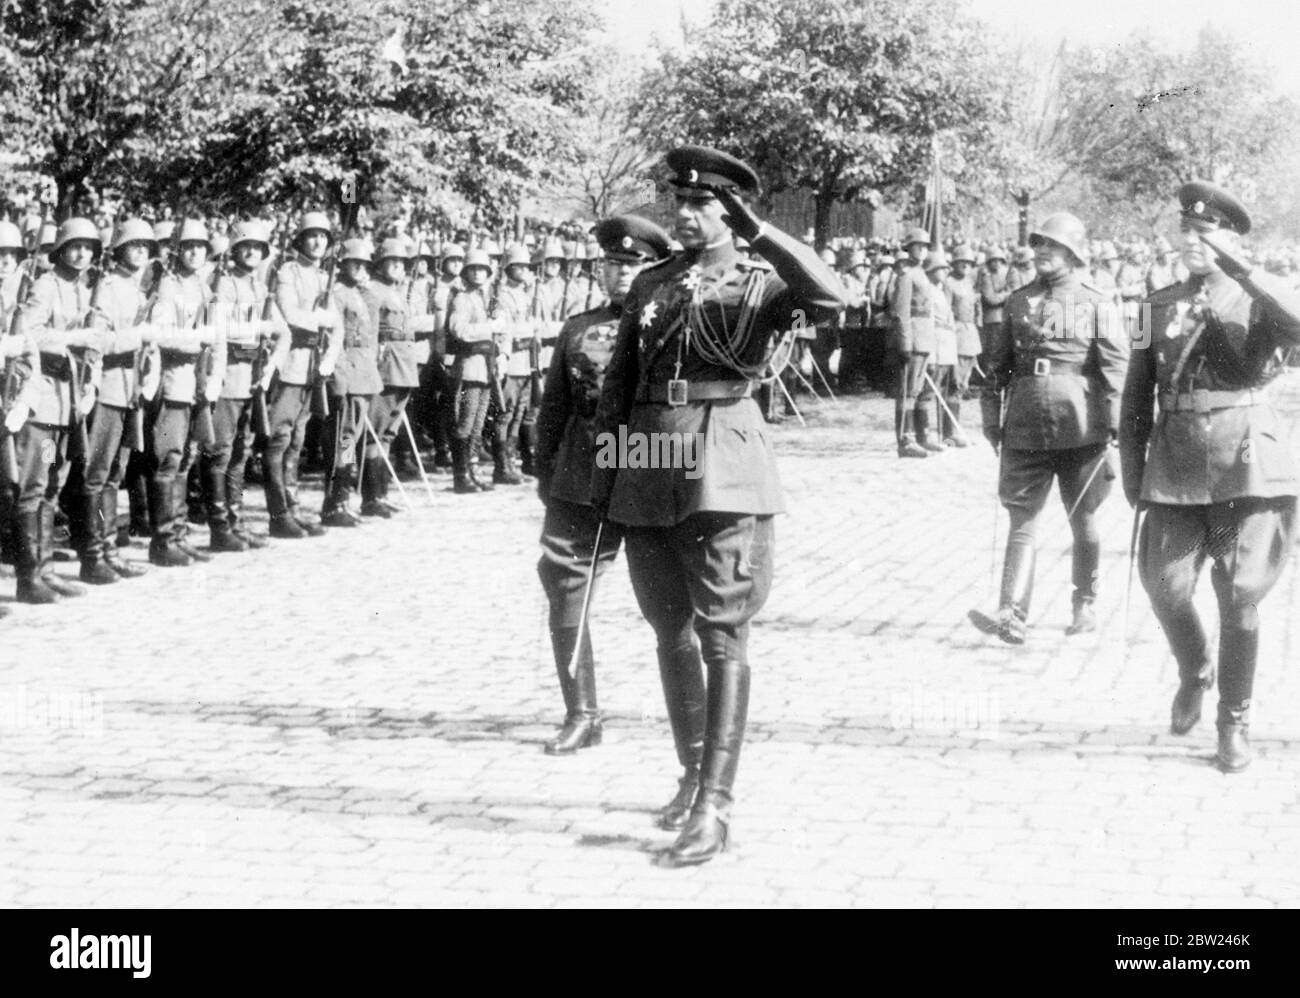 The last picture of Major General Jordan Peeff, Chief of the General Staff of the Bulgarian army, who was shot dead with his adjutant, Major Dimitri Stoyanoff, when walking near the War Ministry in Sofia. Major General Peef is seen inspecting troops at the conclusion of the recent autumn manoeuvres of the Bulgarian army. The general was murdered by an ex-policeman named Stoilvassei Kiroff, aged 33, who stated afterwards that he received a sum of Â£40 to commit the crime. 12 October 1938 Stock Photo